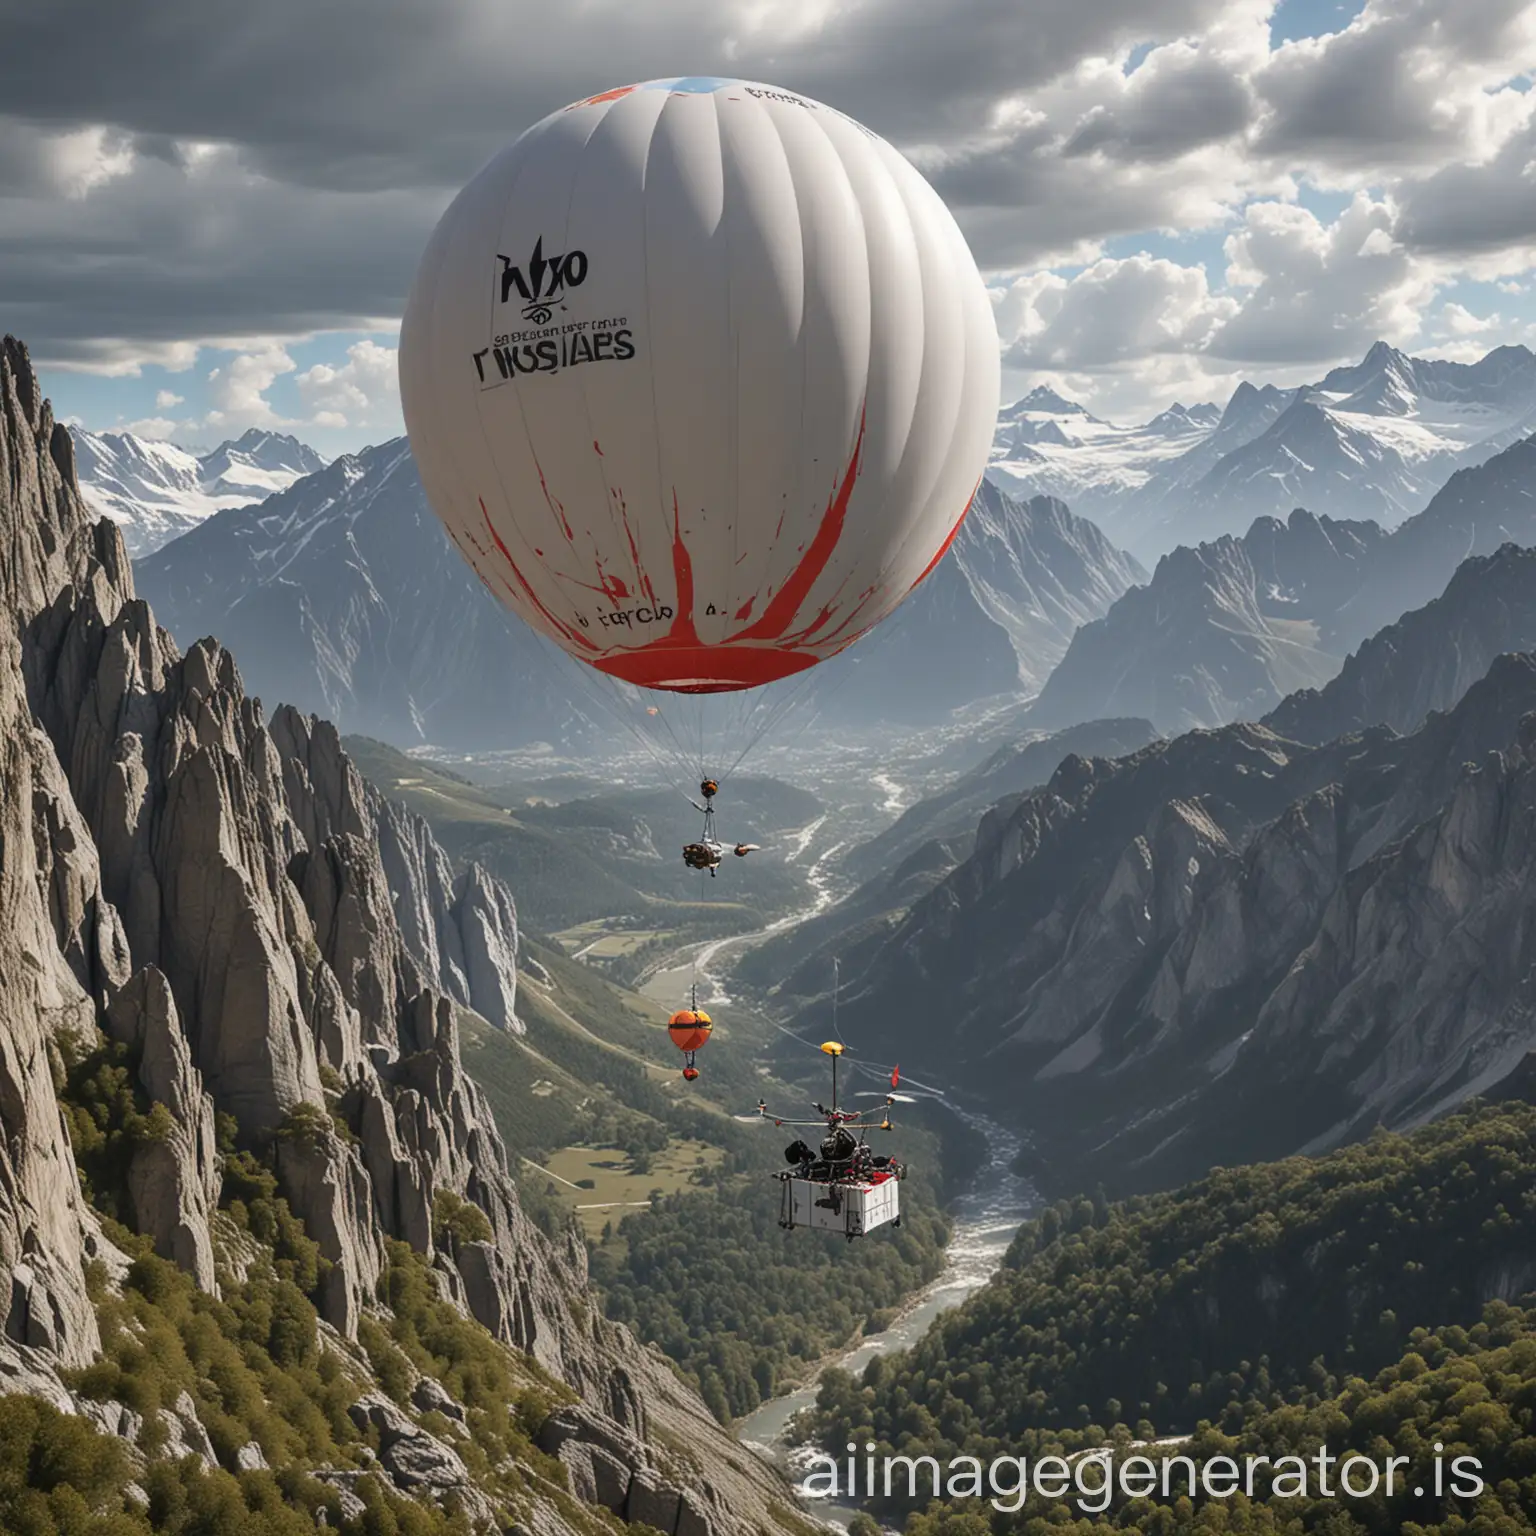 Help me design an aerial rescue balloon, design a kind of device similar to a balloon, which can carry relief personnel and equipment. This ball can be controlled by drones or other aircraft to quickly reach mountain target locations. Once the destination is reached, the ball can slowly descend, placing relief personnel and equipment in the area requiring rescue